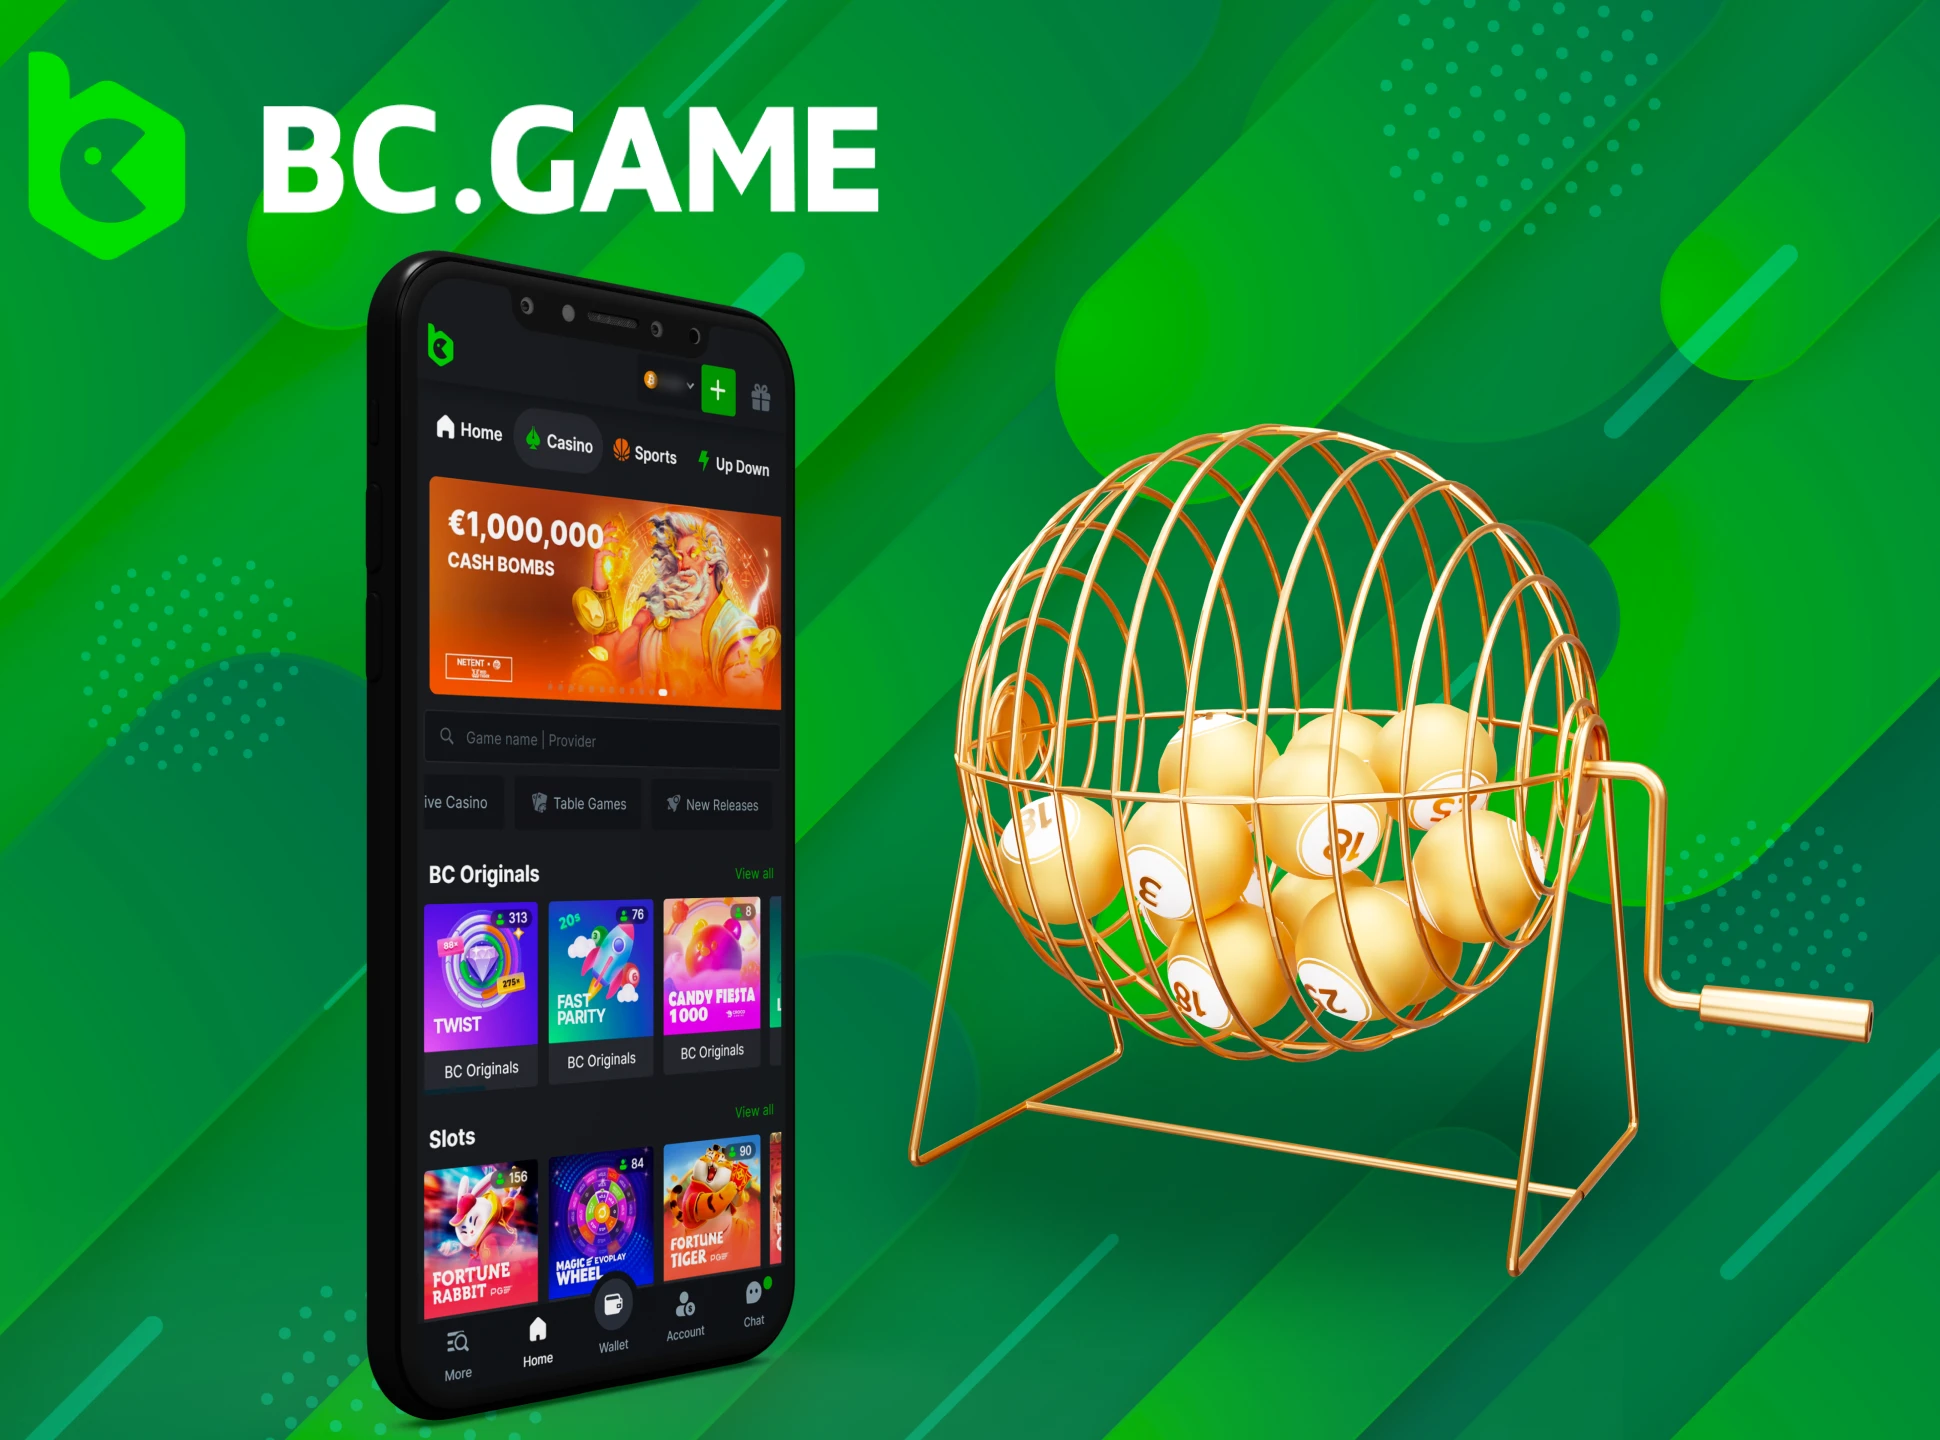 Play TV games and win big on the BC Game app.